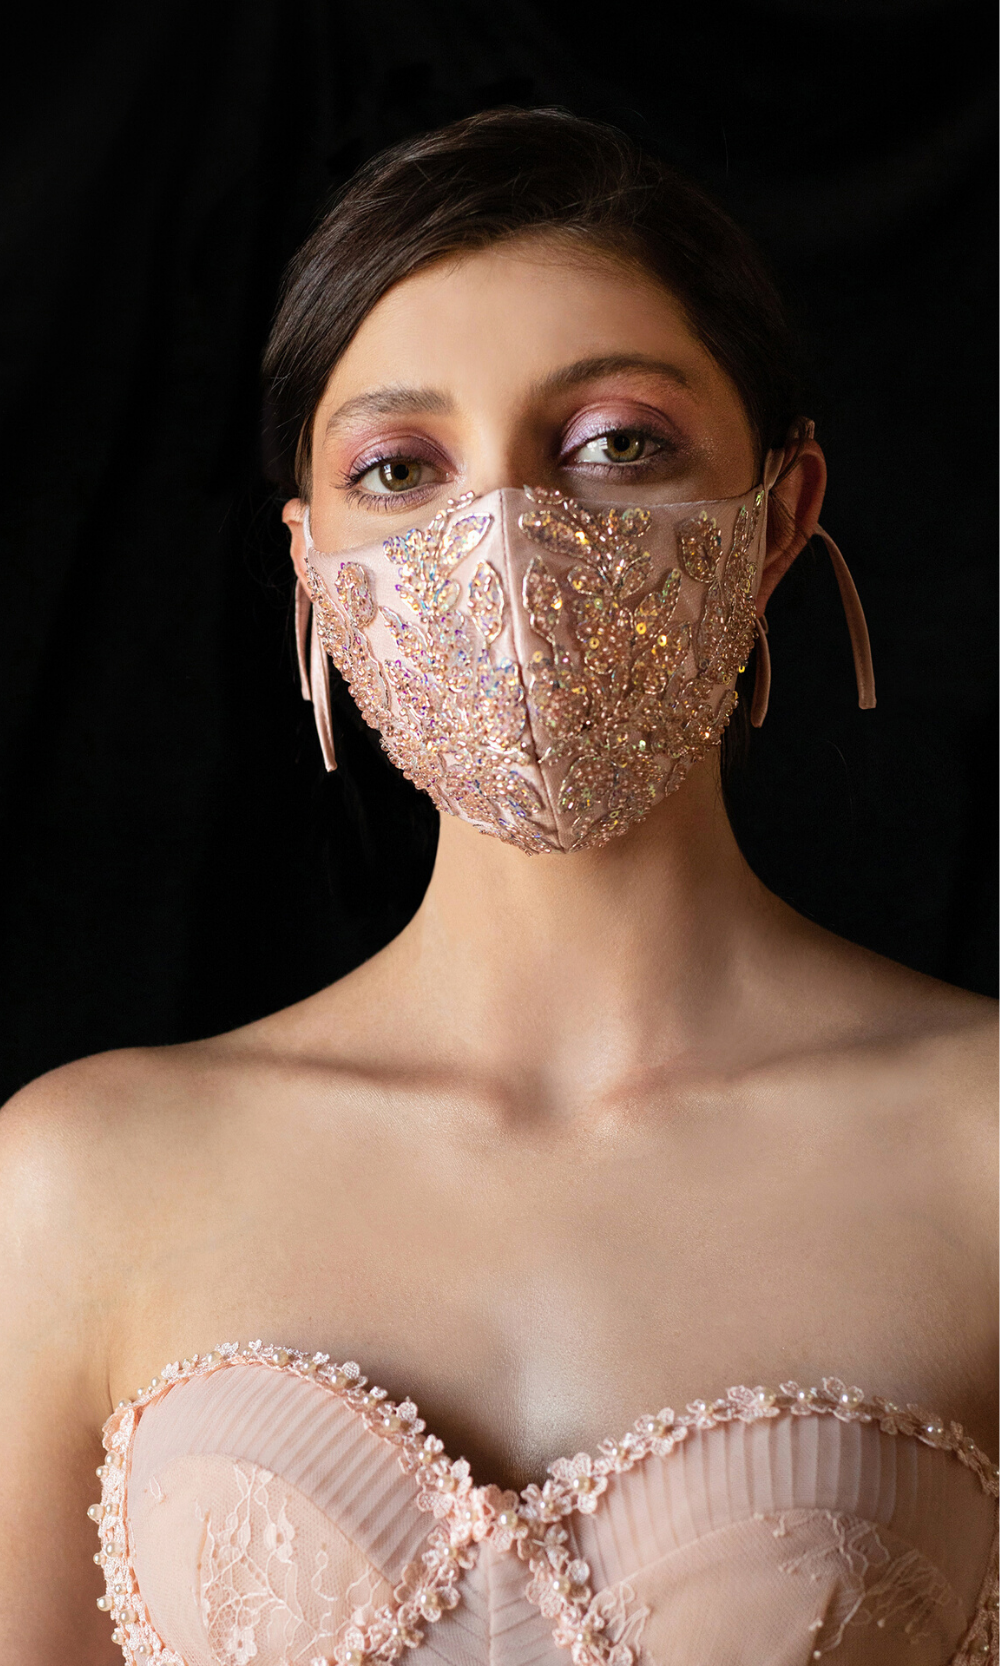 Sequin beaded mask for wedding, prom, special occasion, court wedding, backyard wedding